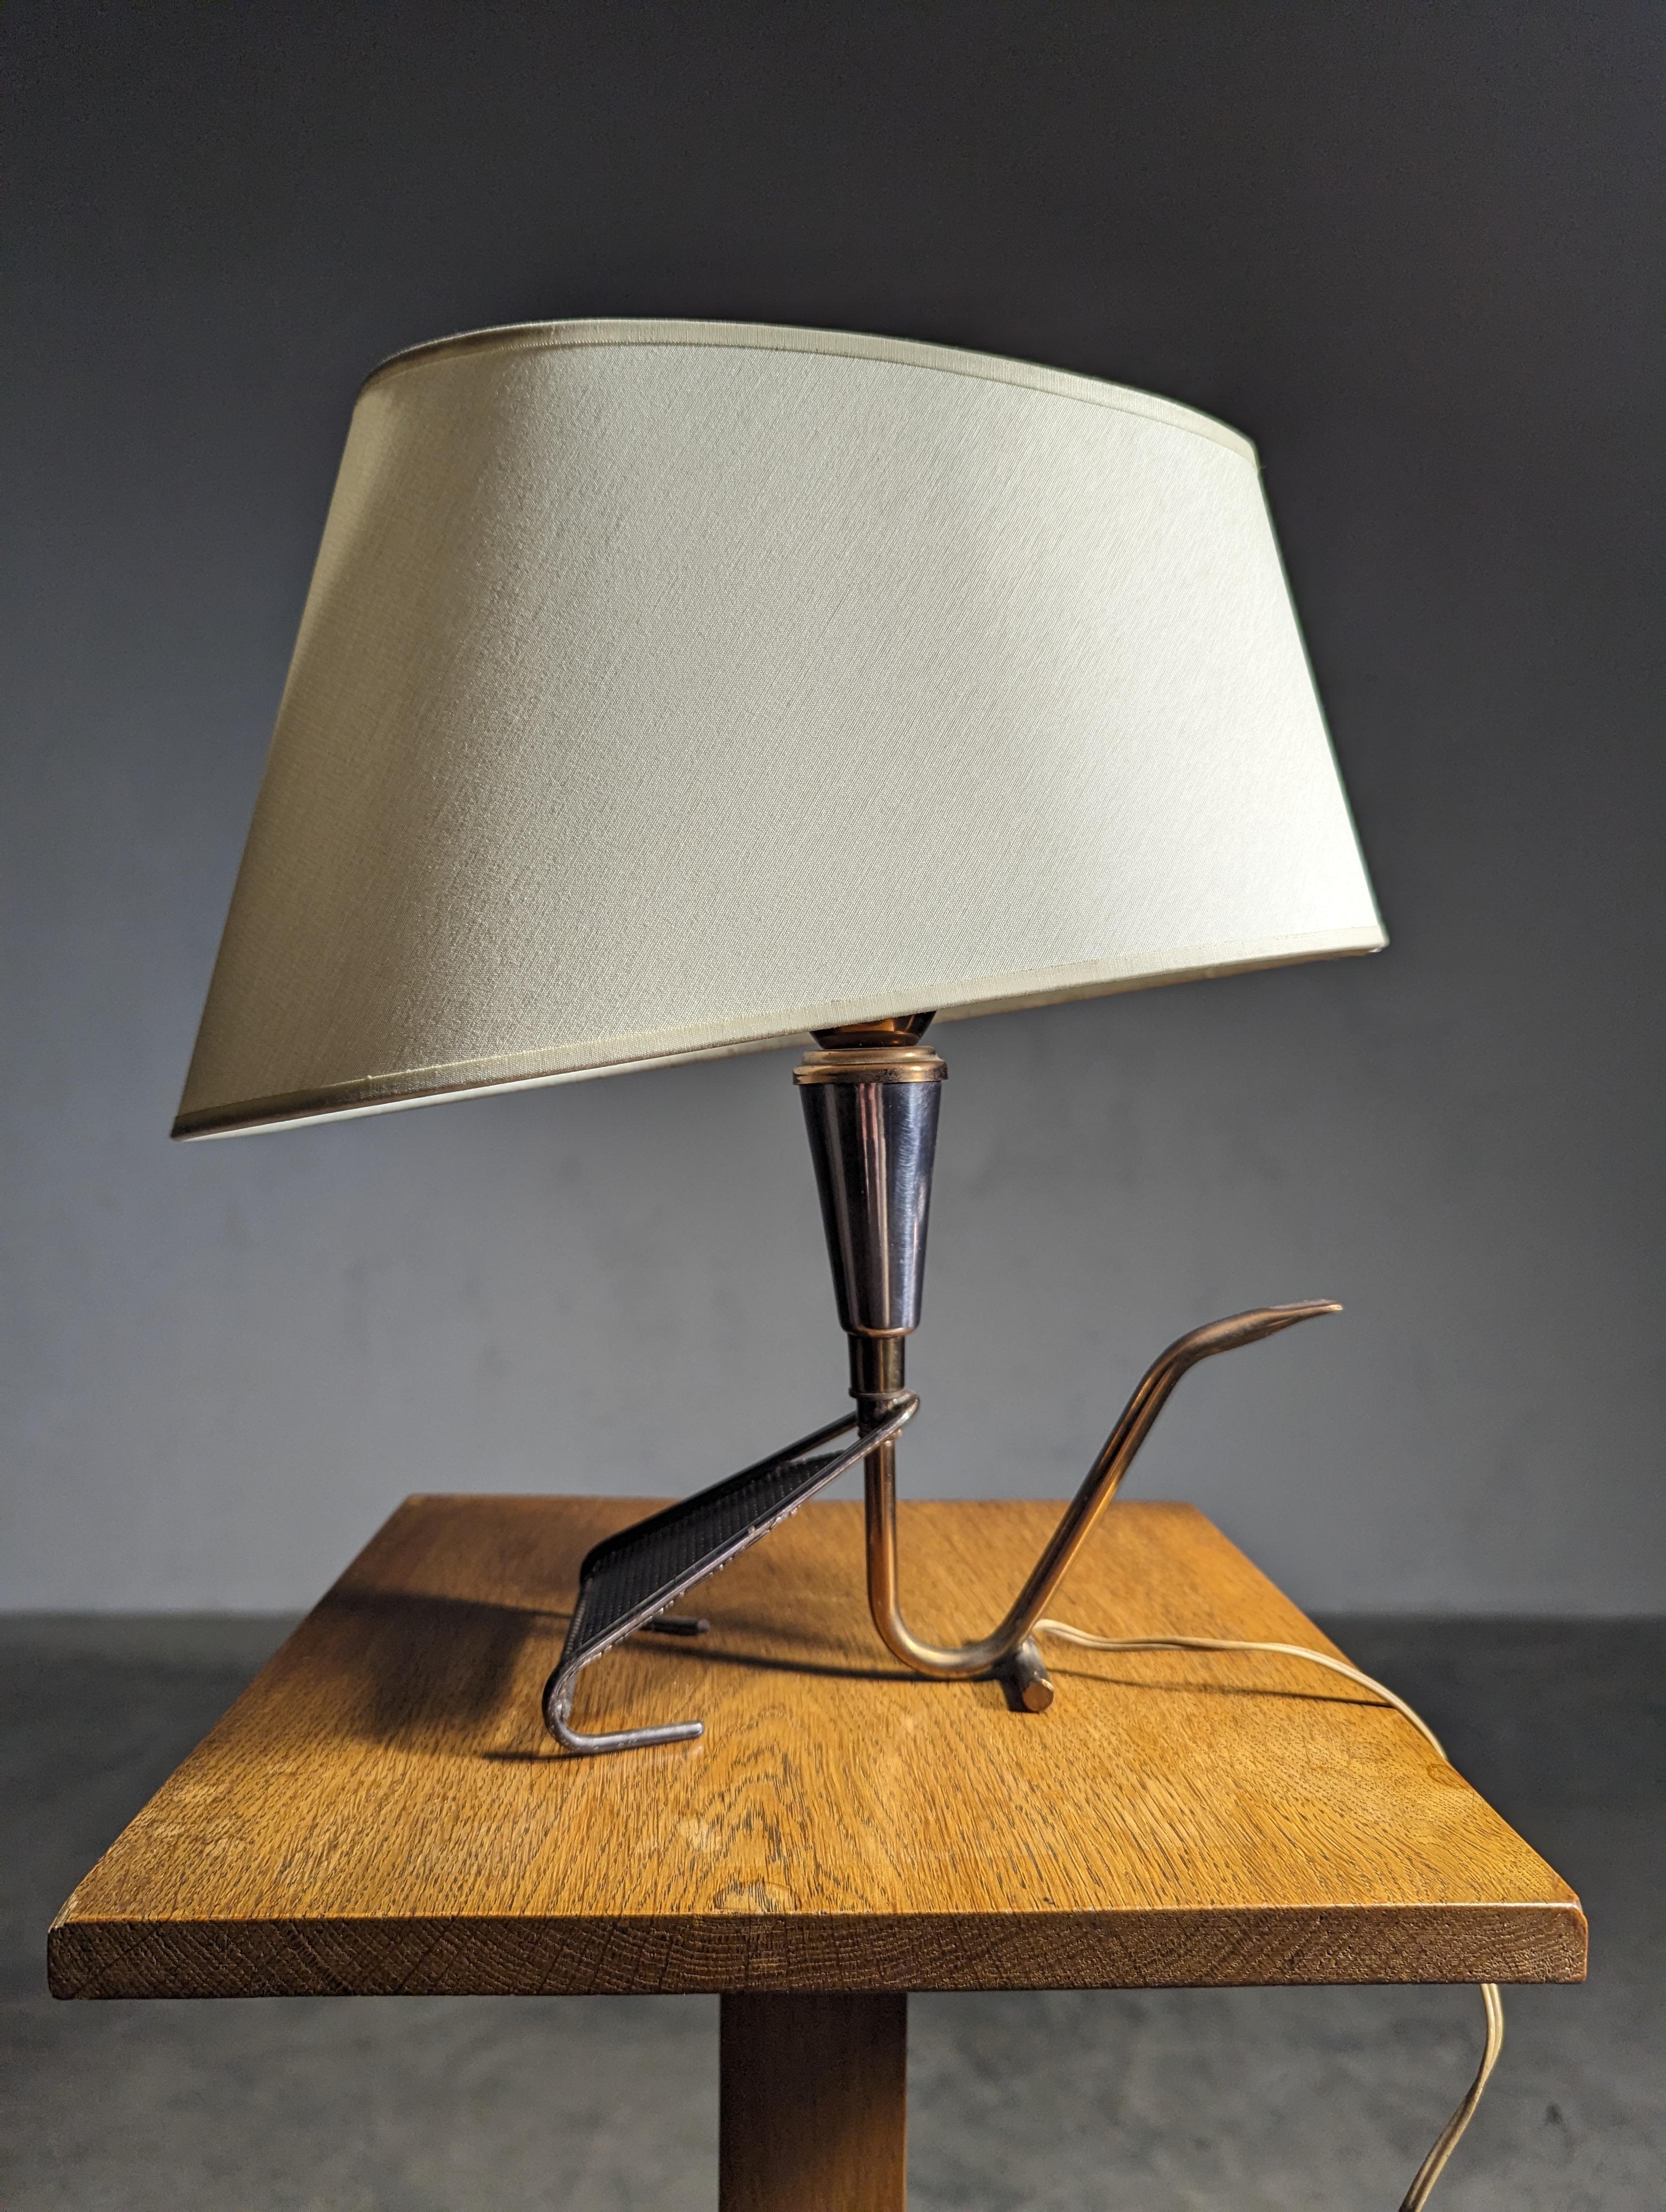 French table lamp in brass from 50's by Maison Arlus with lampshade.
Made of brass and metal parts with a 